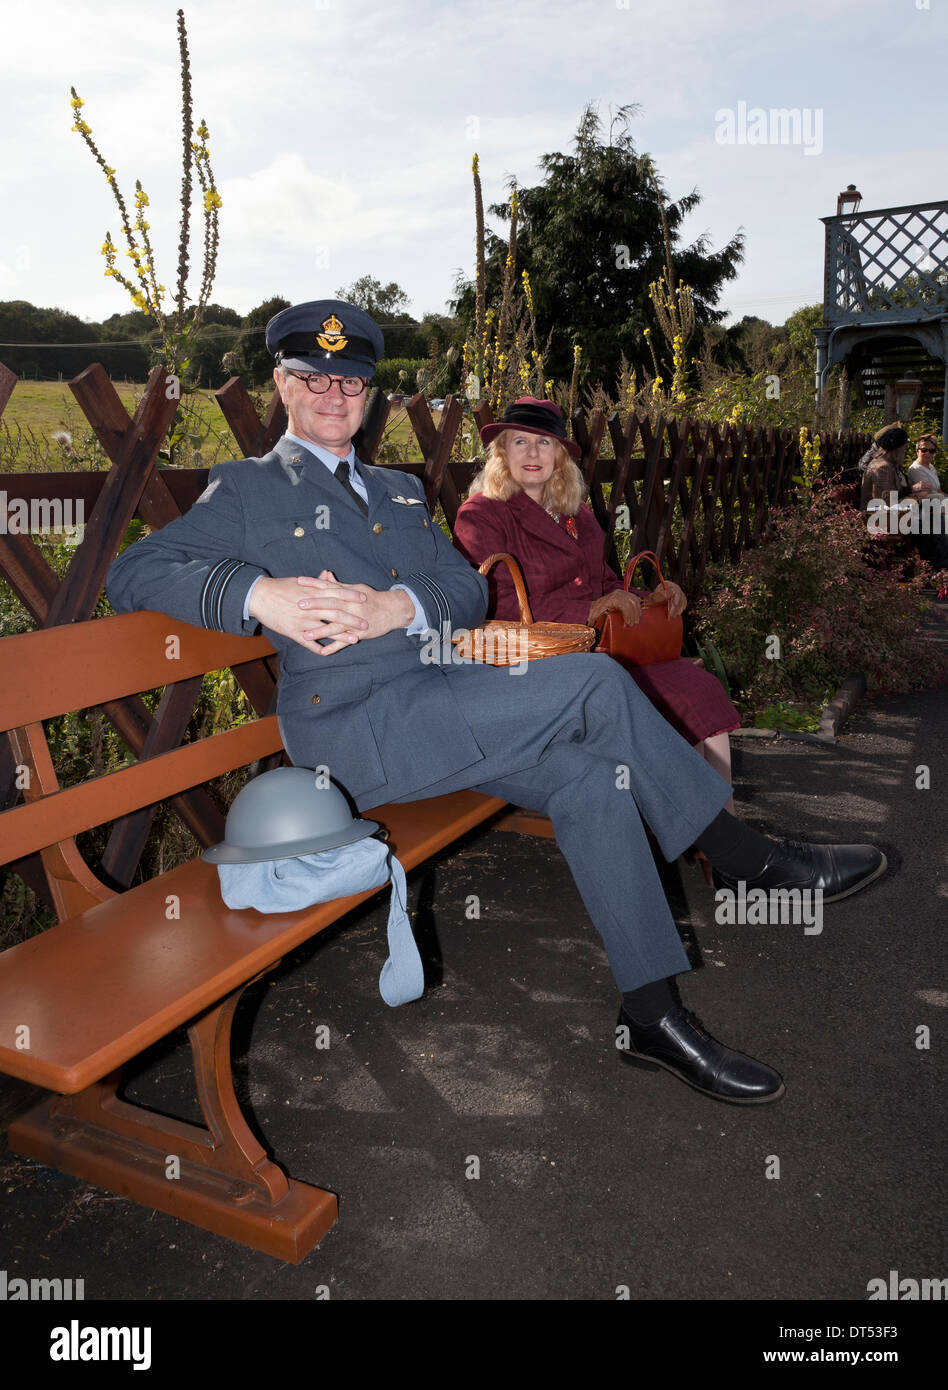 Two people in 1940's costume waiting at a railway station Stock Photo